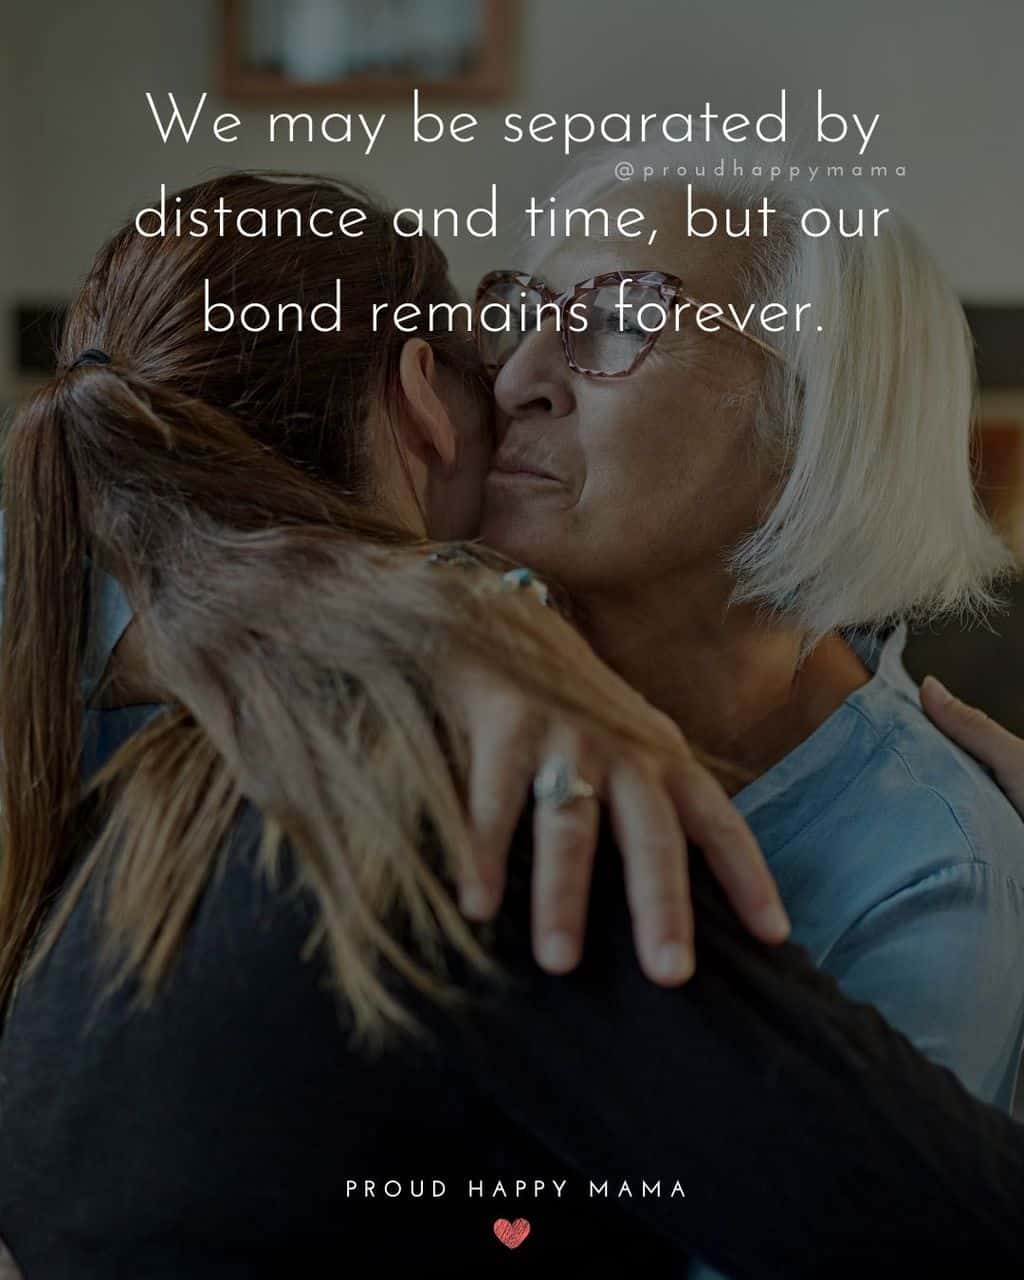 Niece Quotes - We may be separated by distance and time, but our bond remains forever.